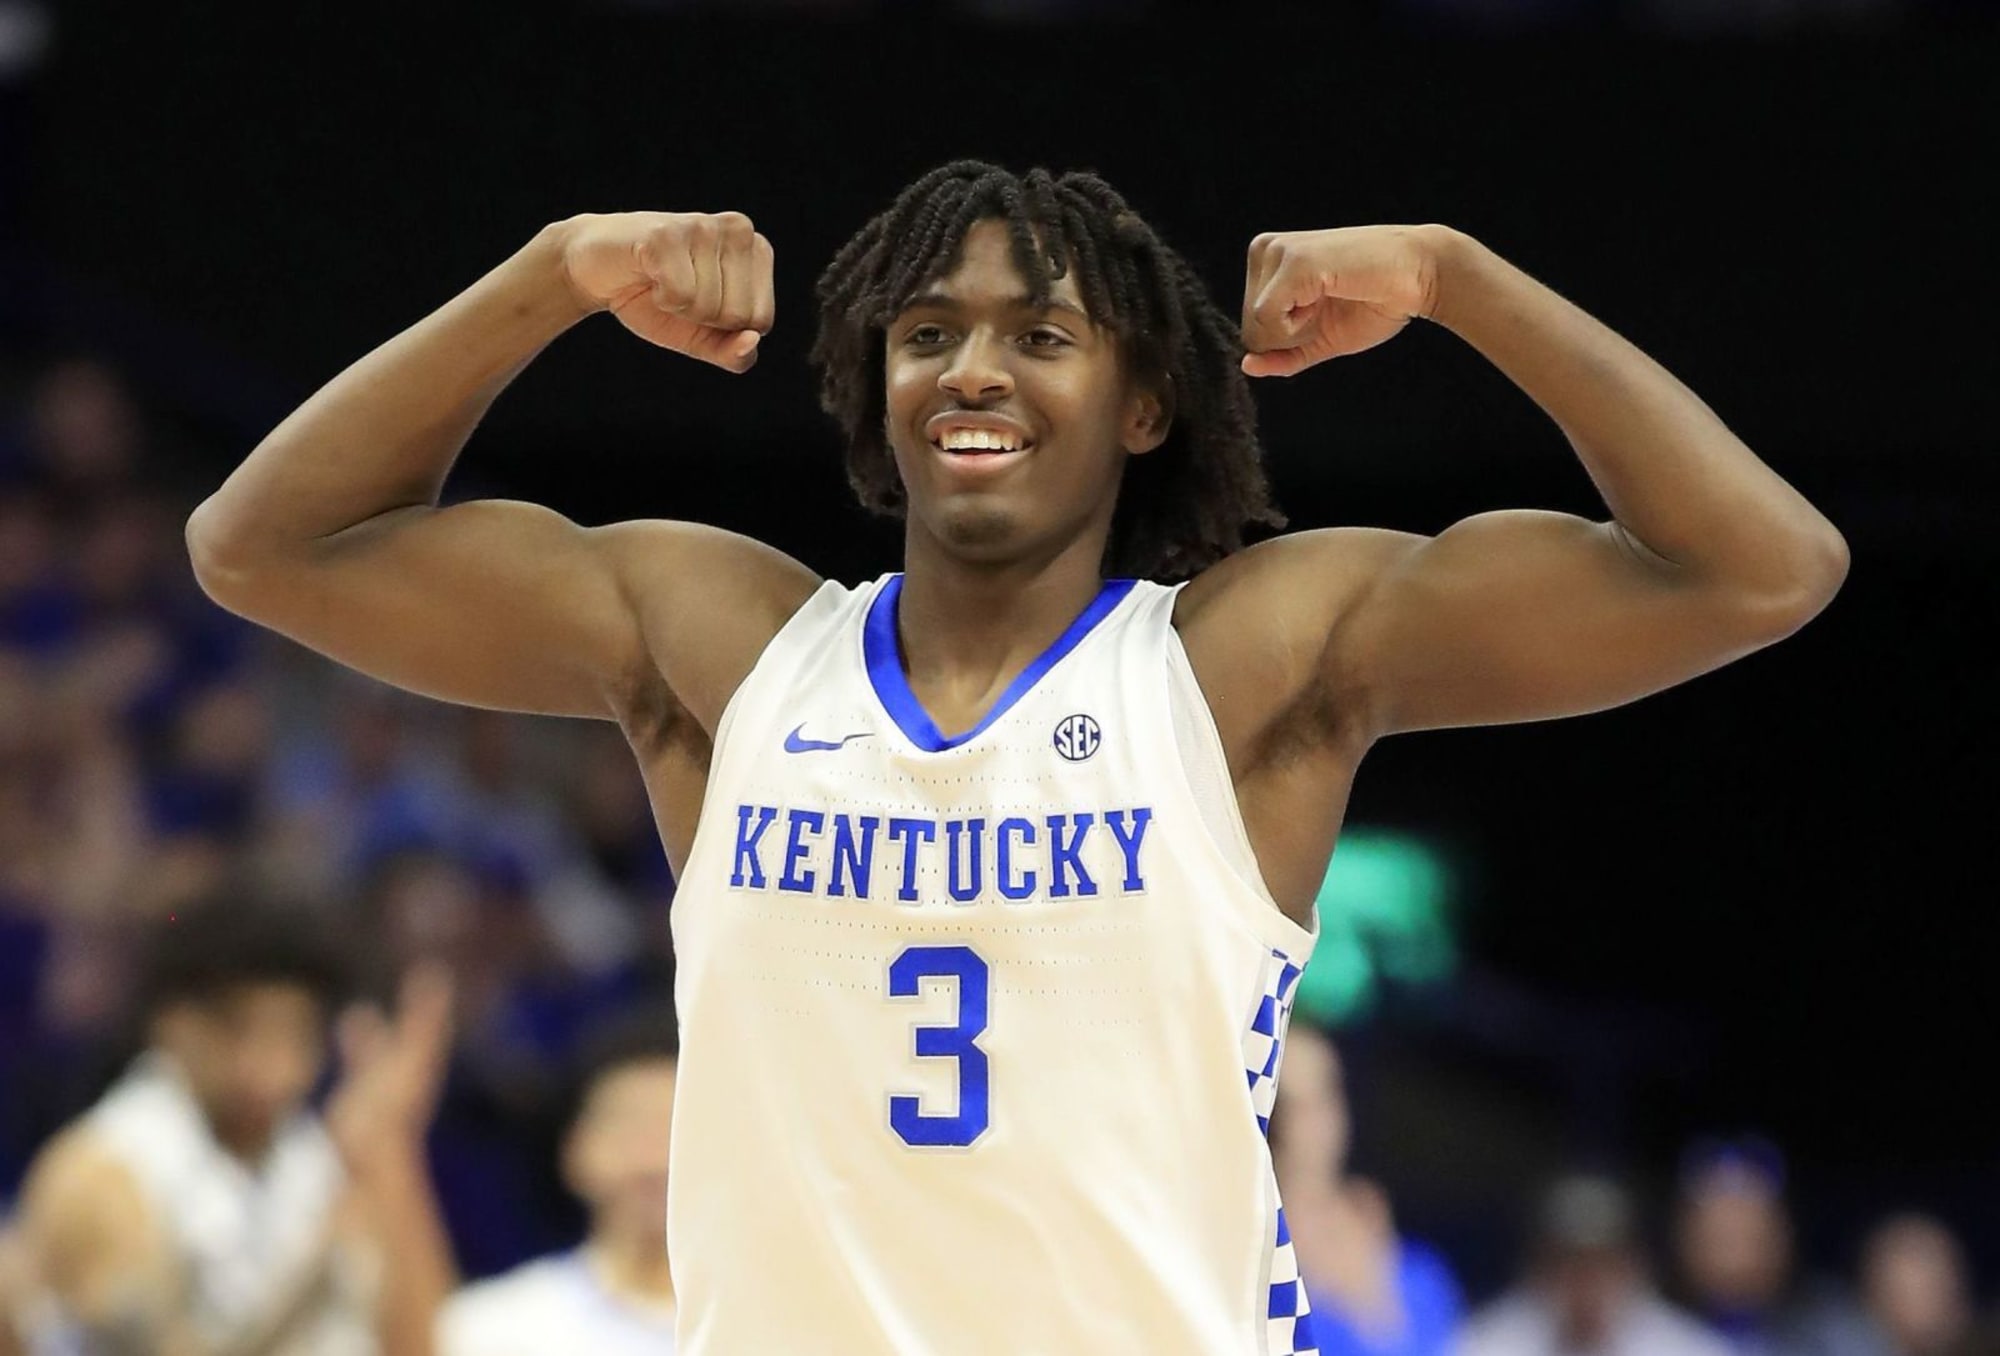 Tyrese Maxey has a way to go to become the starting point guard